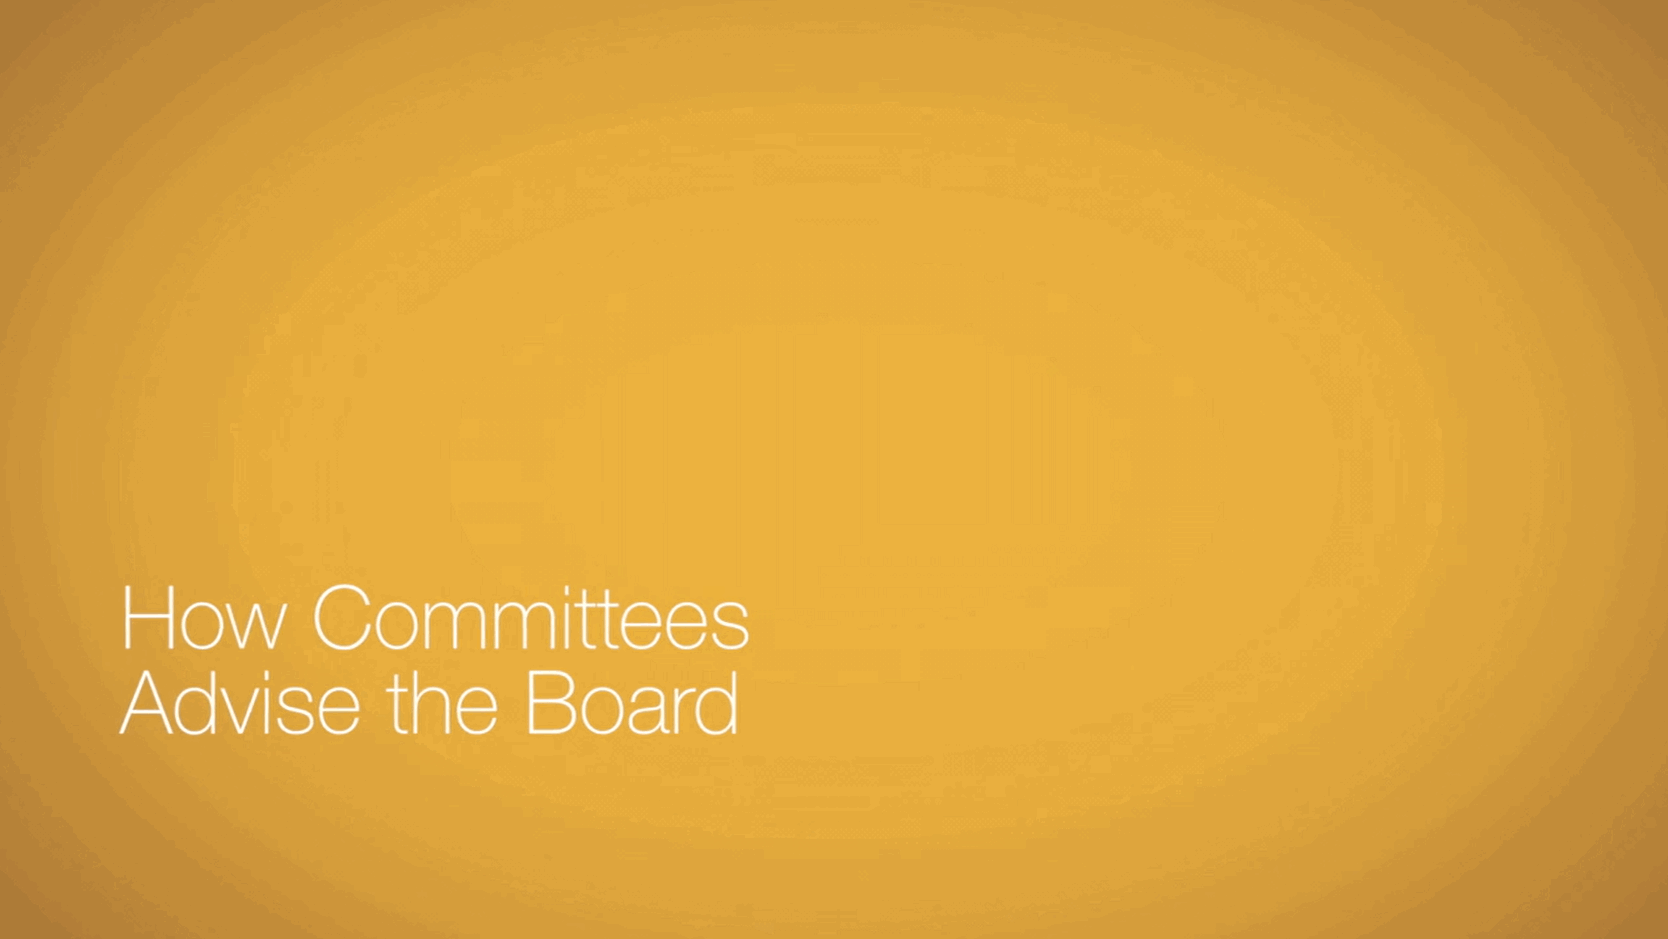 How Committees Advise the Board